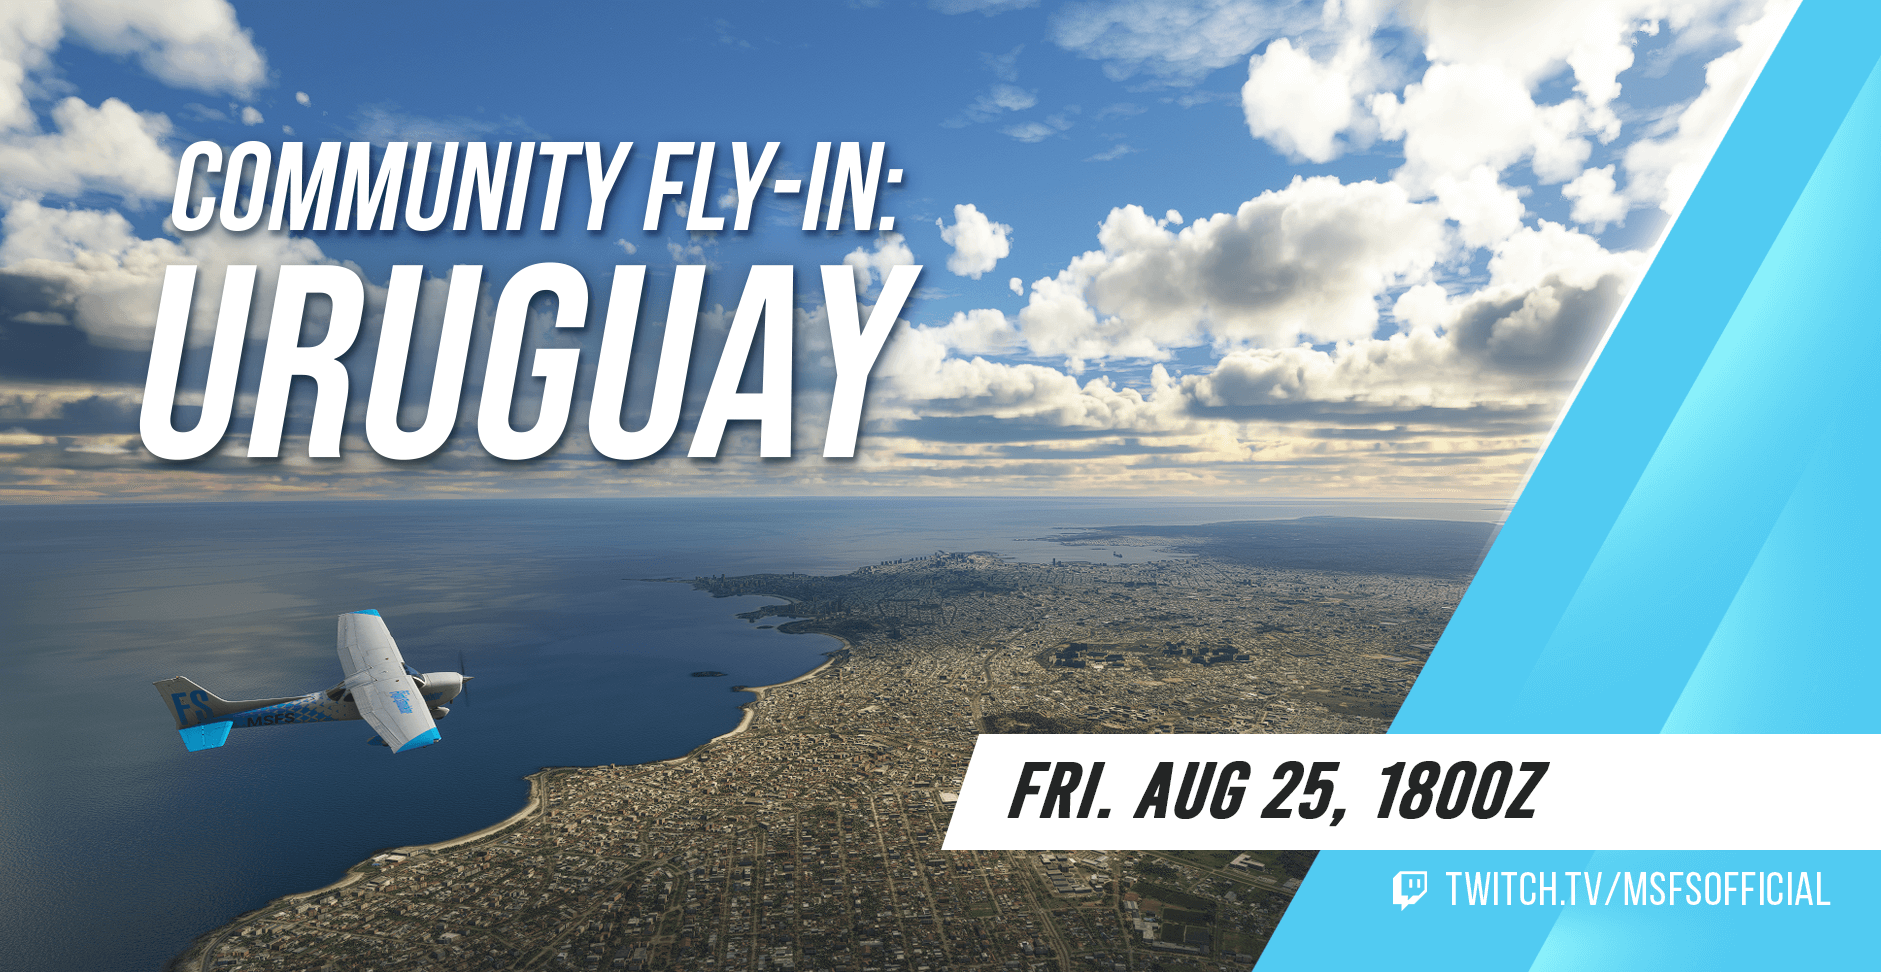 A Cessna 172 flies over Montevideo. Community Fly-In: Uruguay. Join us on Friday August 25th at 1800Z. Watch at twitch.tv/msfsofficial!